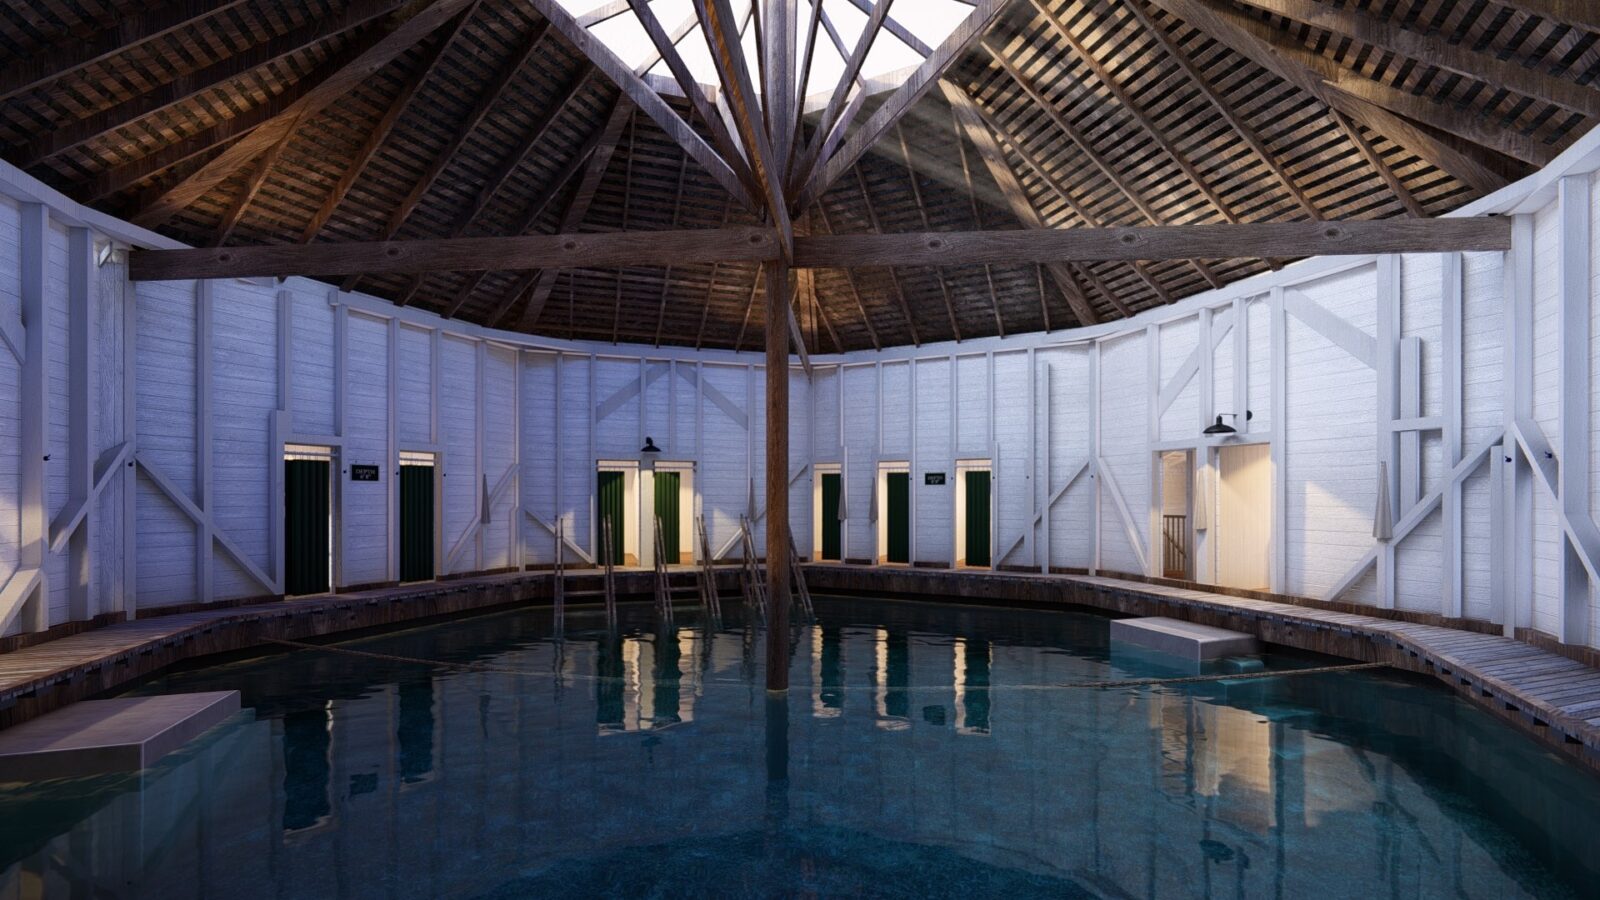 warm-springs-pools,-america’s-oldest-spa,-returns-to-its-former-rustic-glory